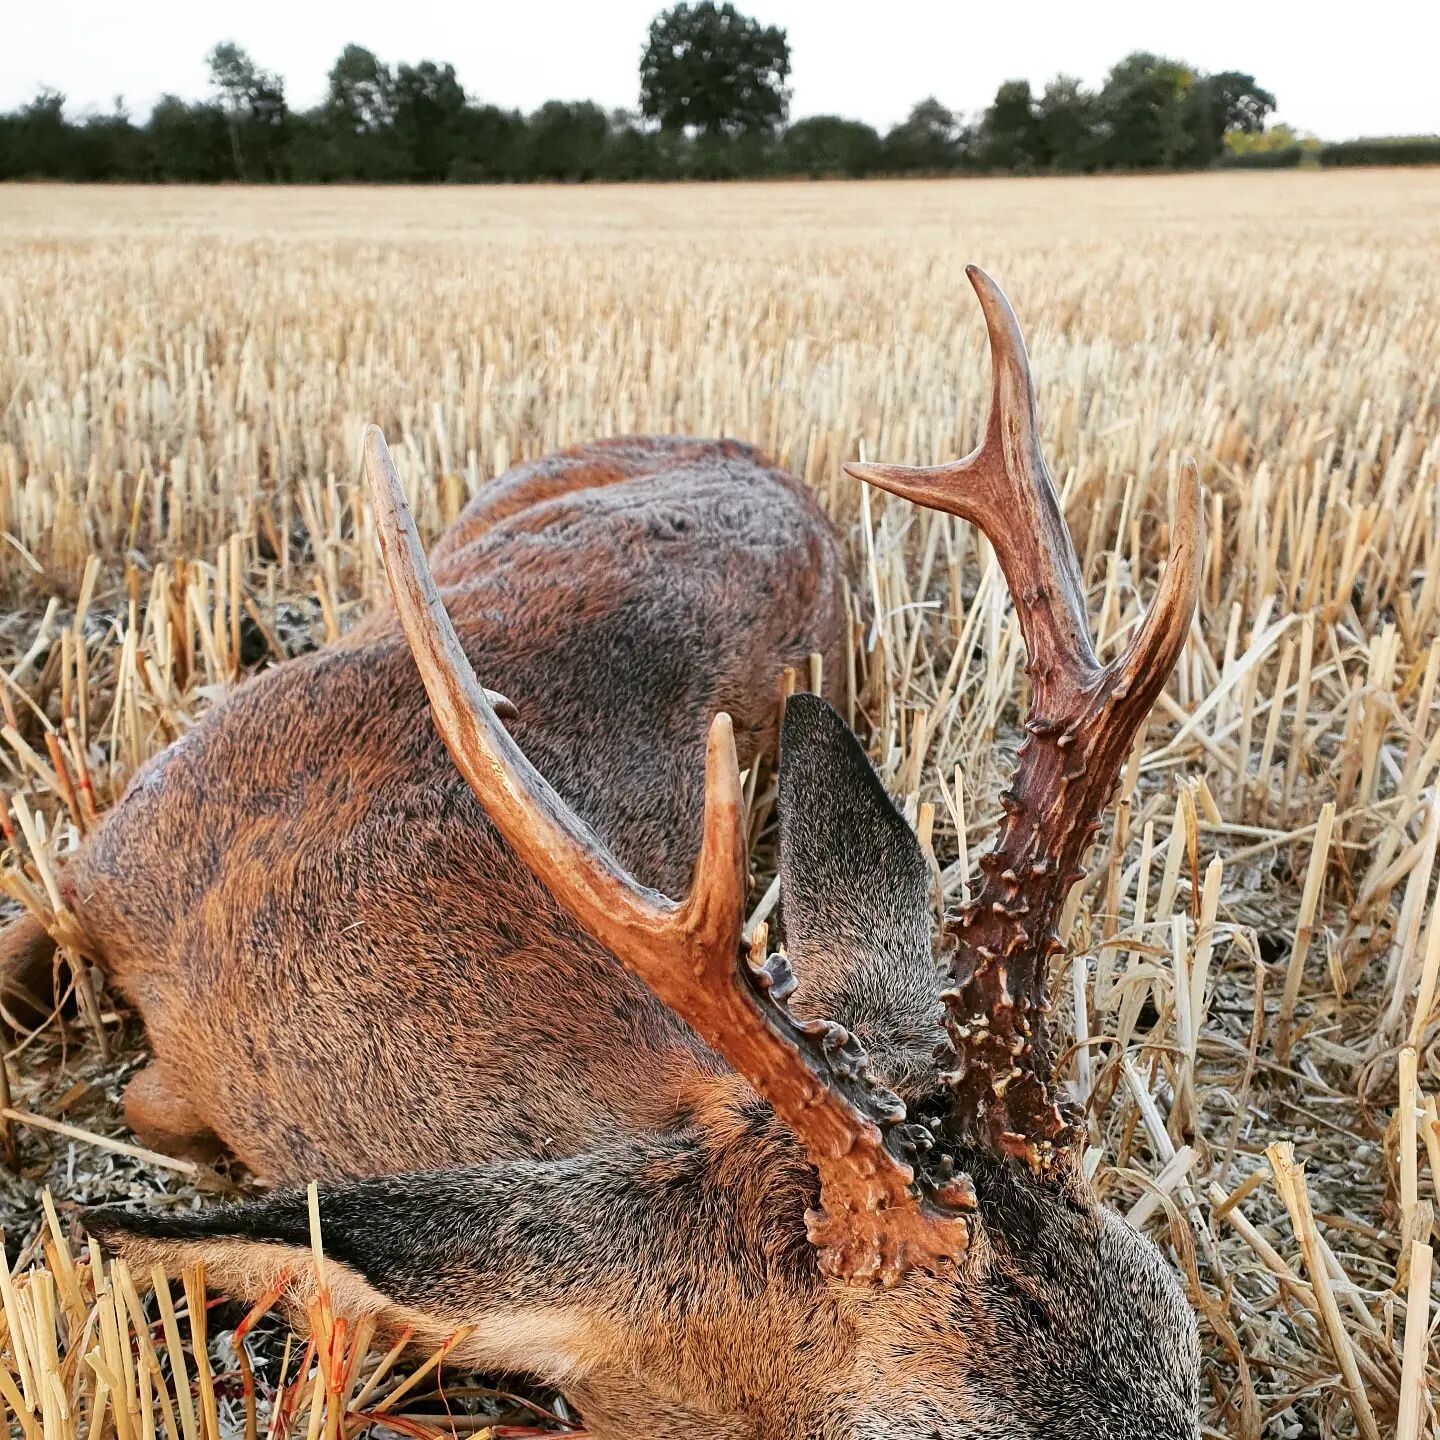 🇬🇧 I had said the rut was about done on our patches to this weekends guest, but while watching a few does and muntjac, a buck and doe tearing acrosss the stubble came from our side. A frantic few pips on the butalo to get her to stop, he stood and 